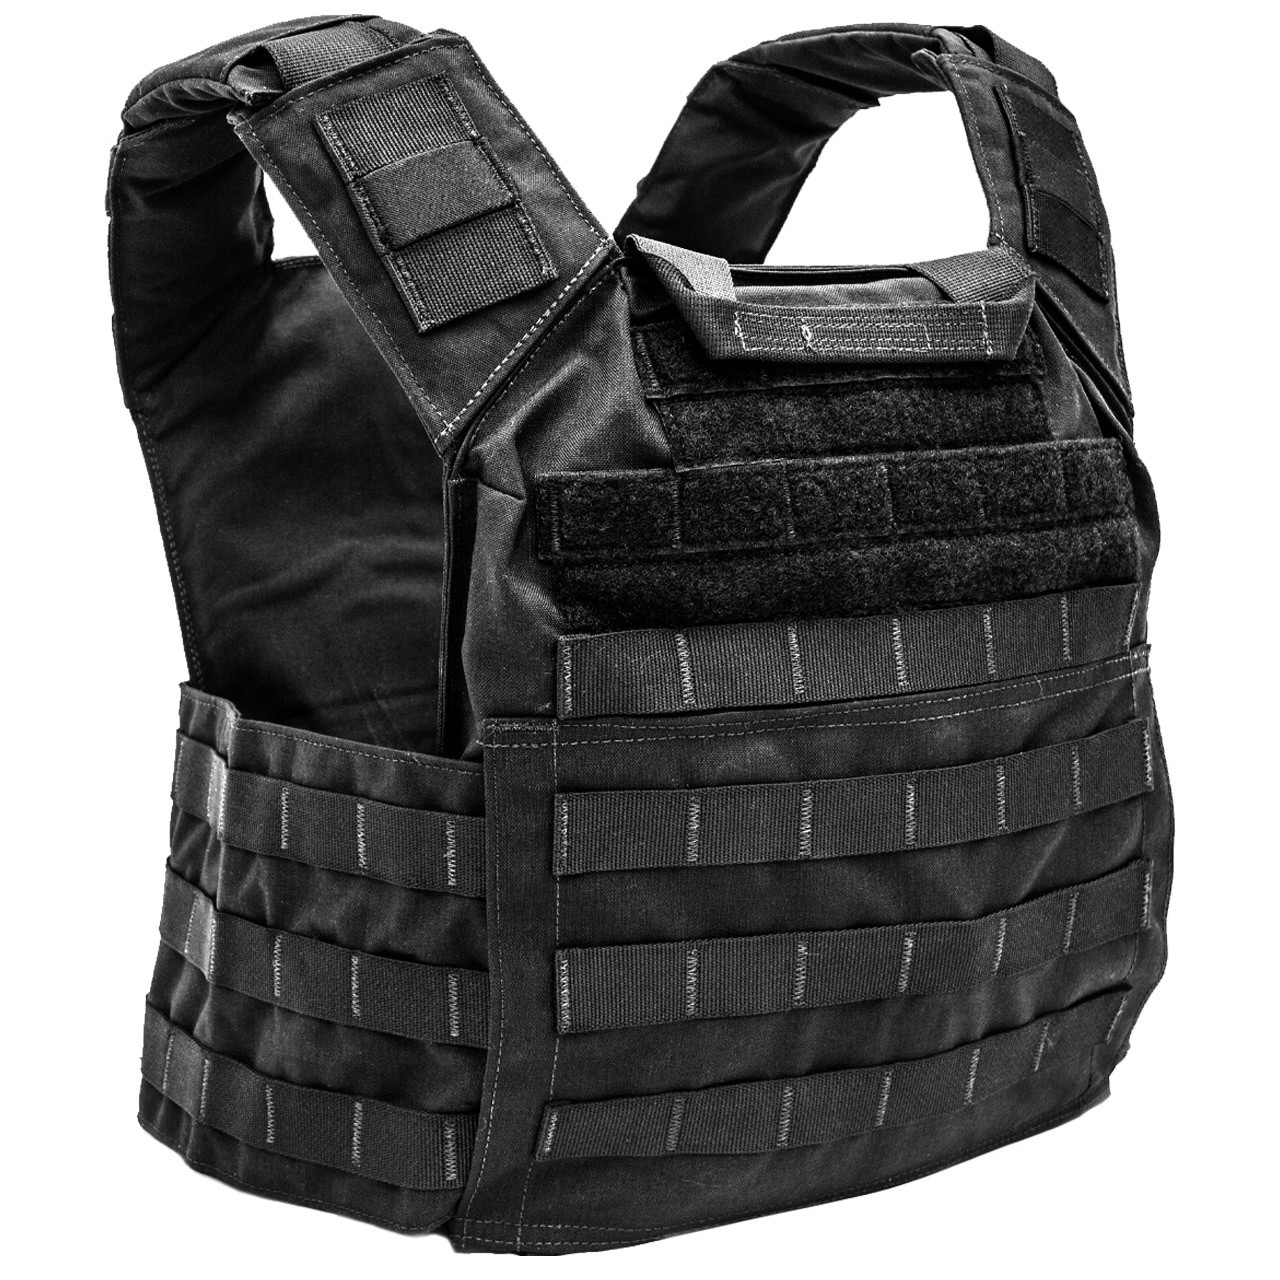 Shellback Tactical Stryker Chest Rig